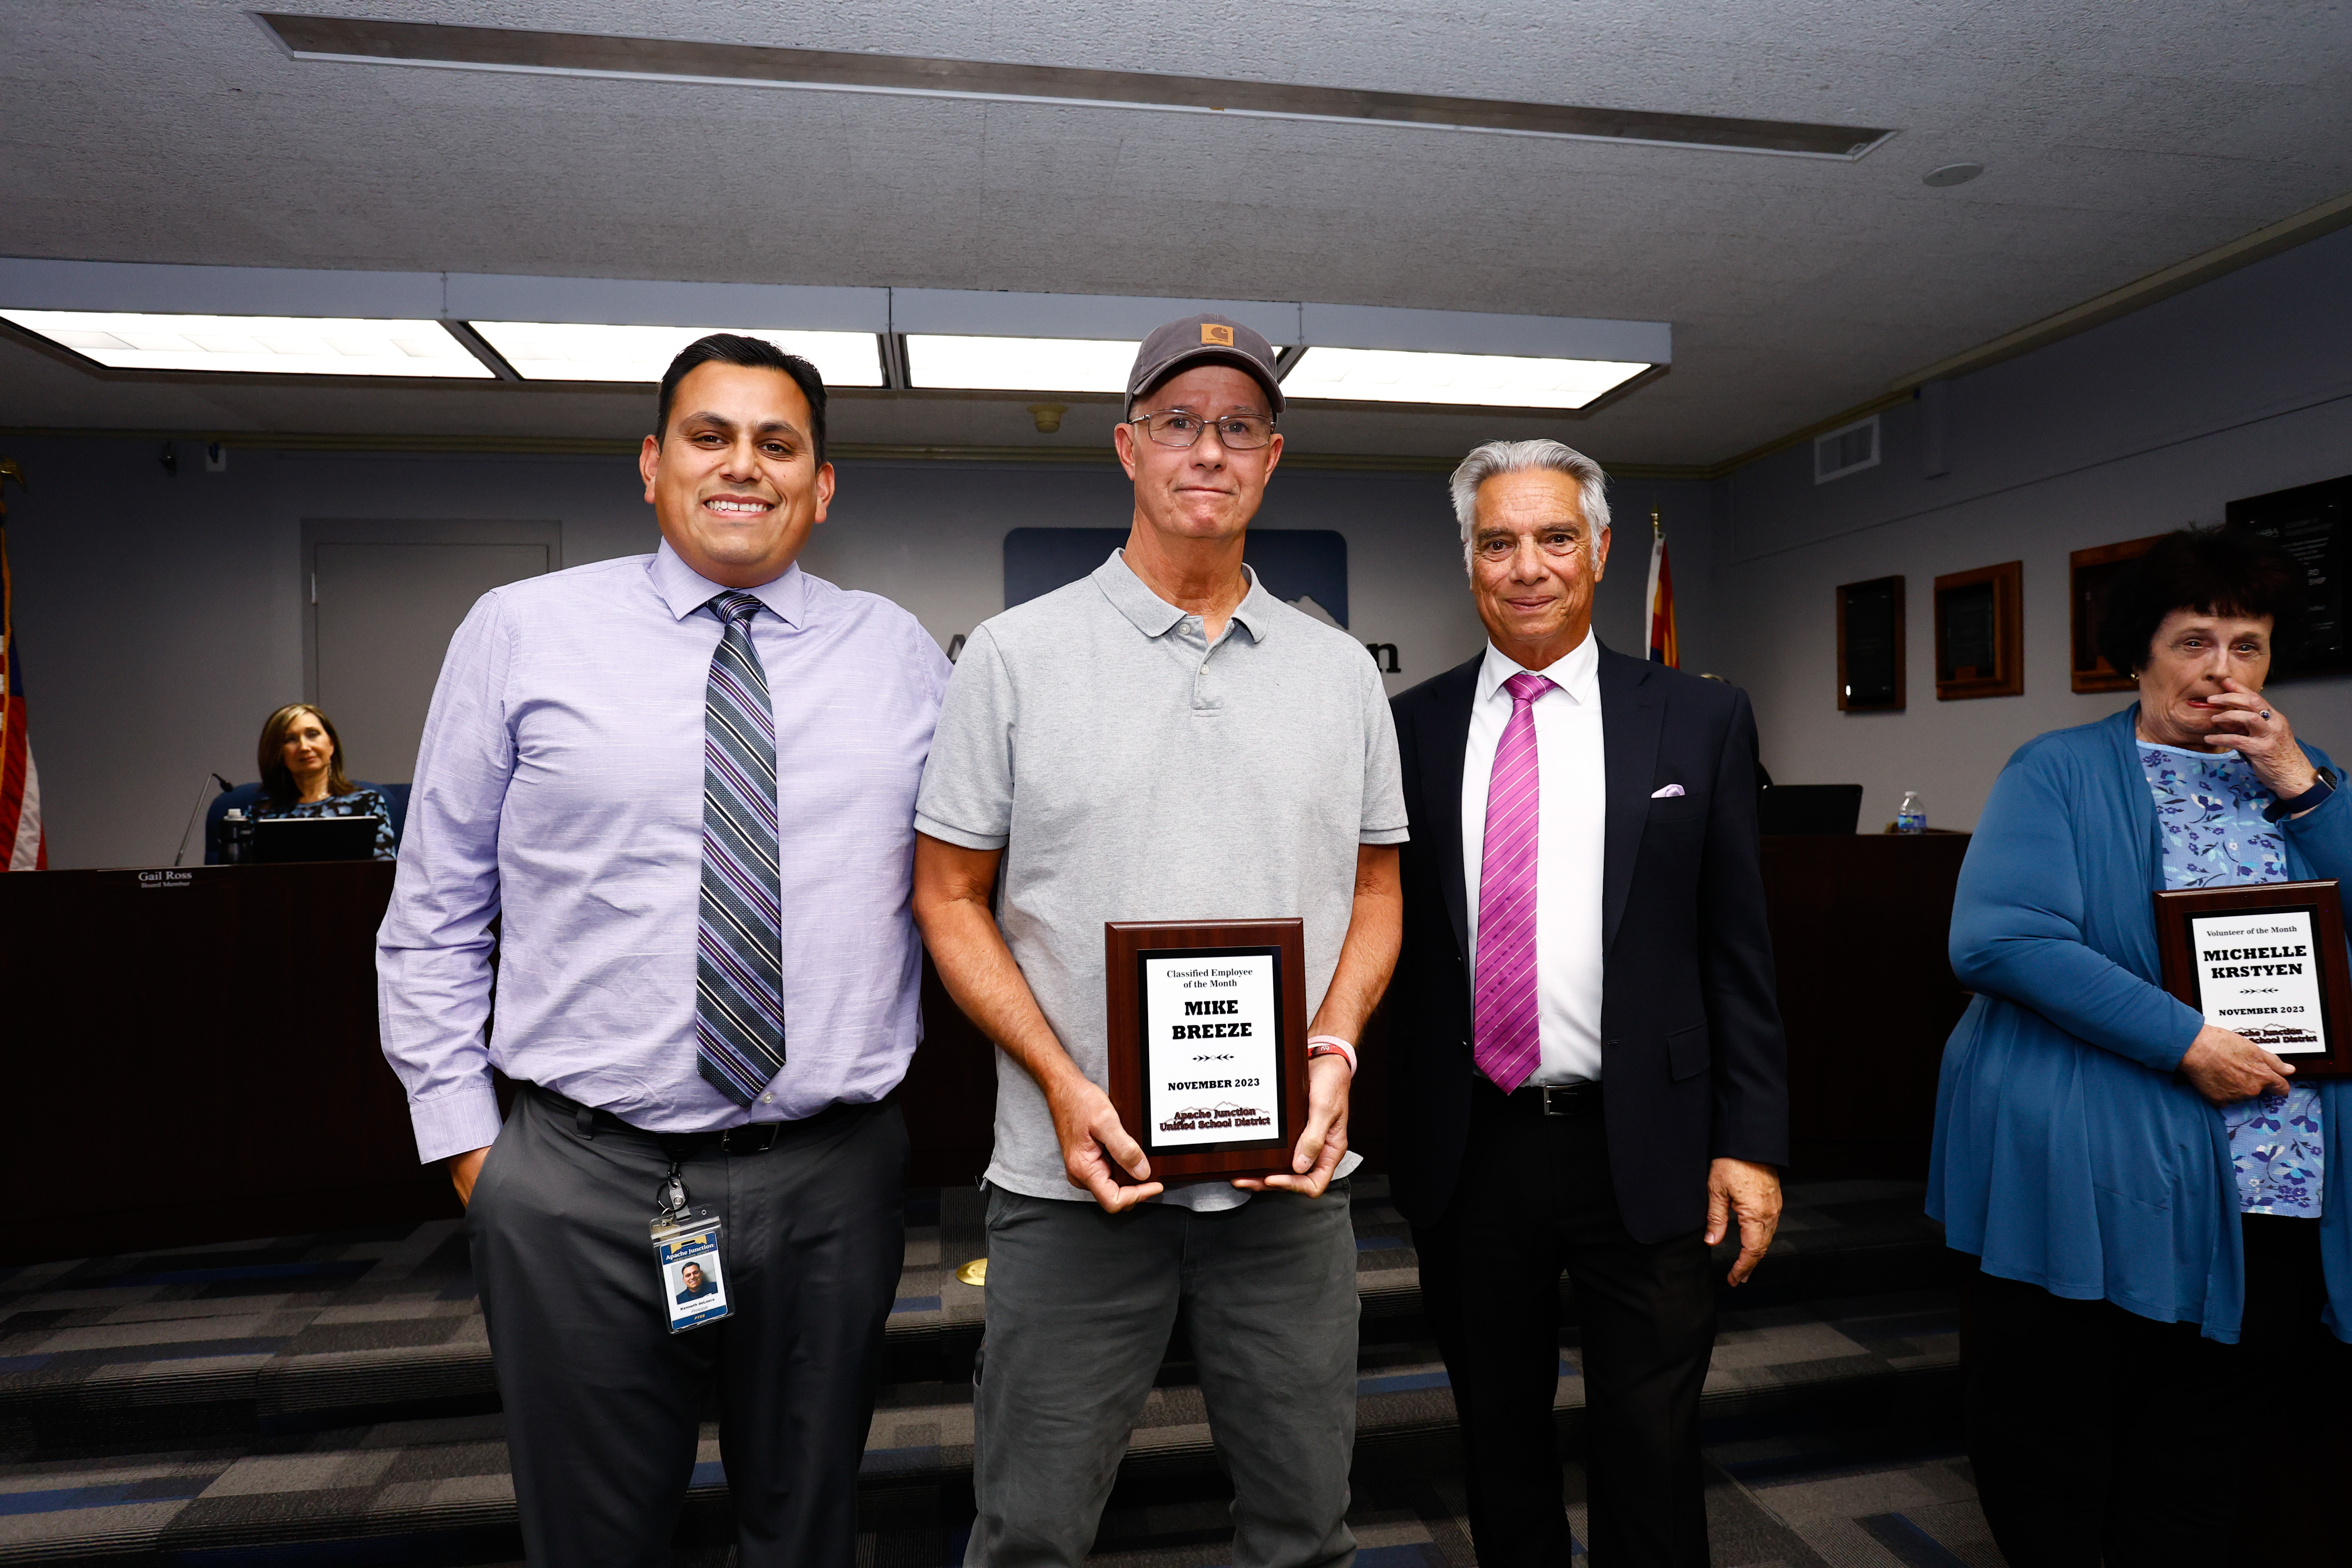 Mike Breeze, November Classified Employee of the Month